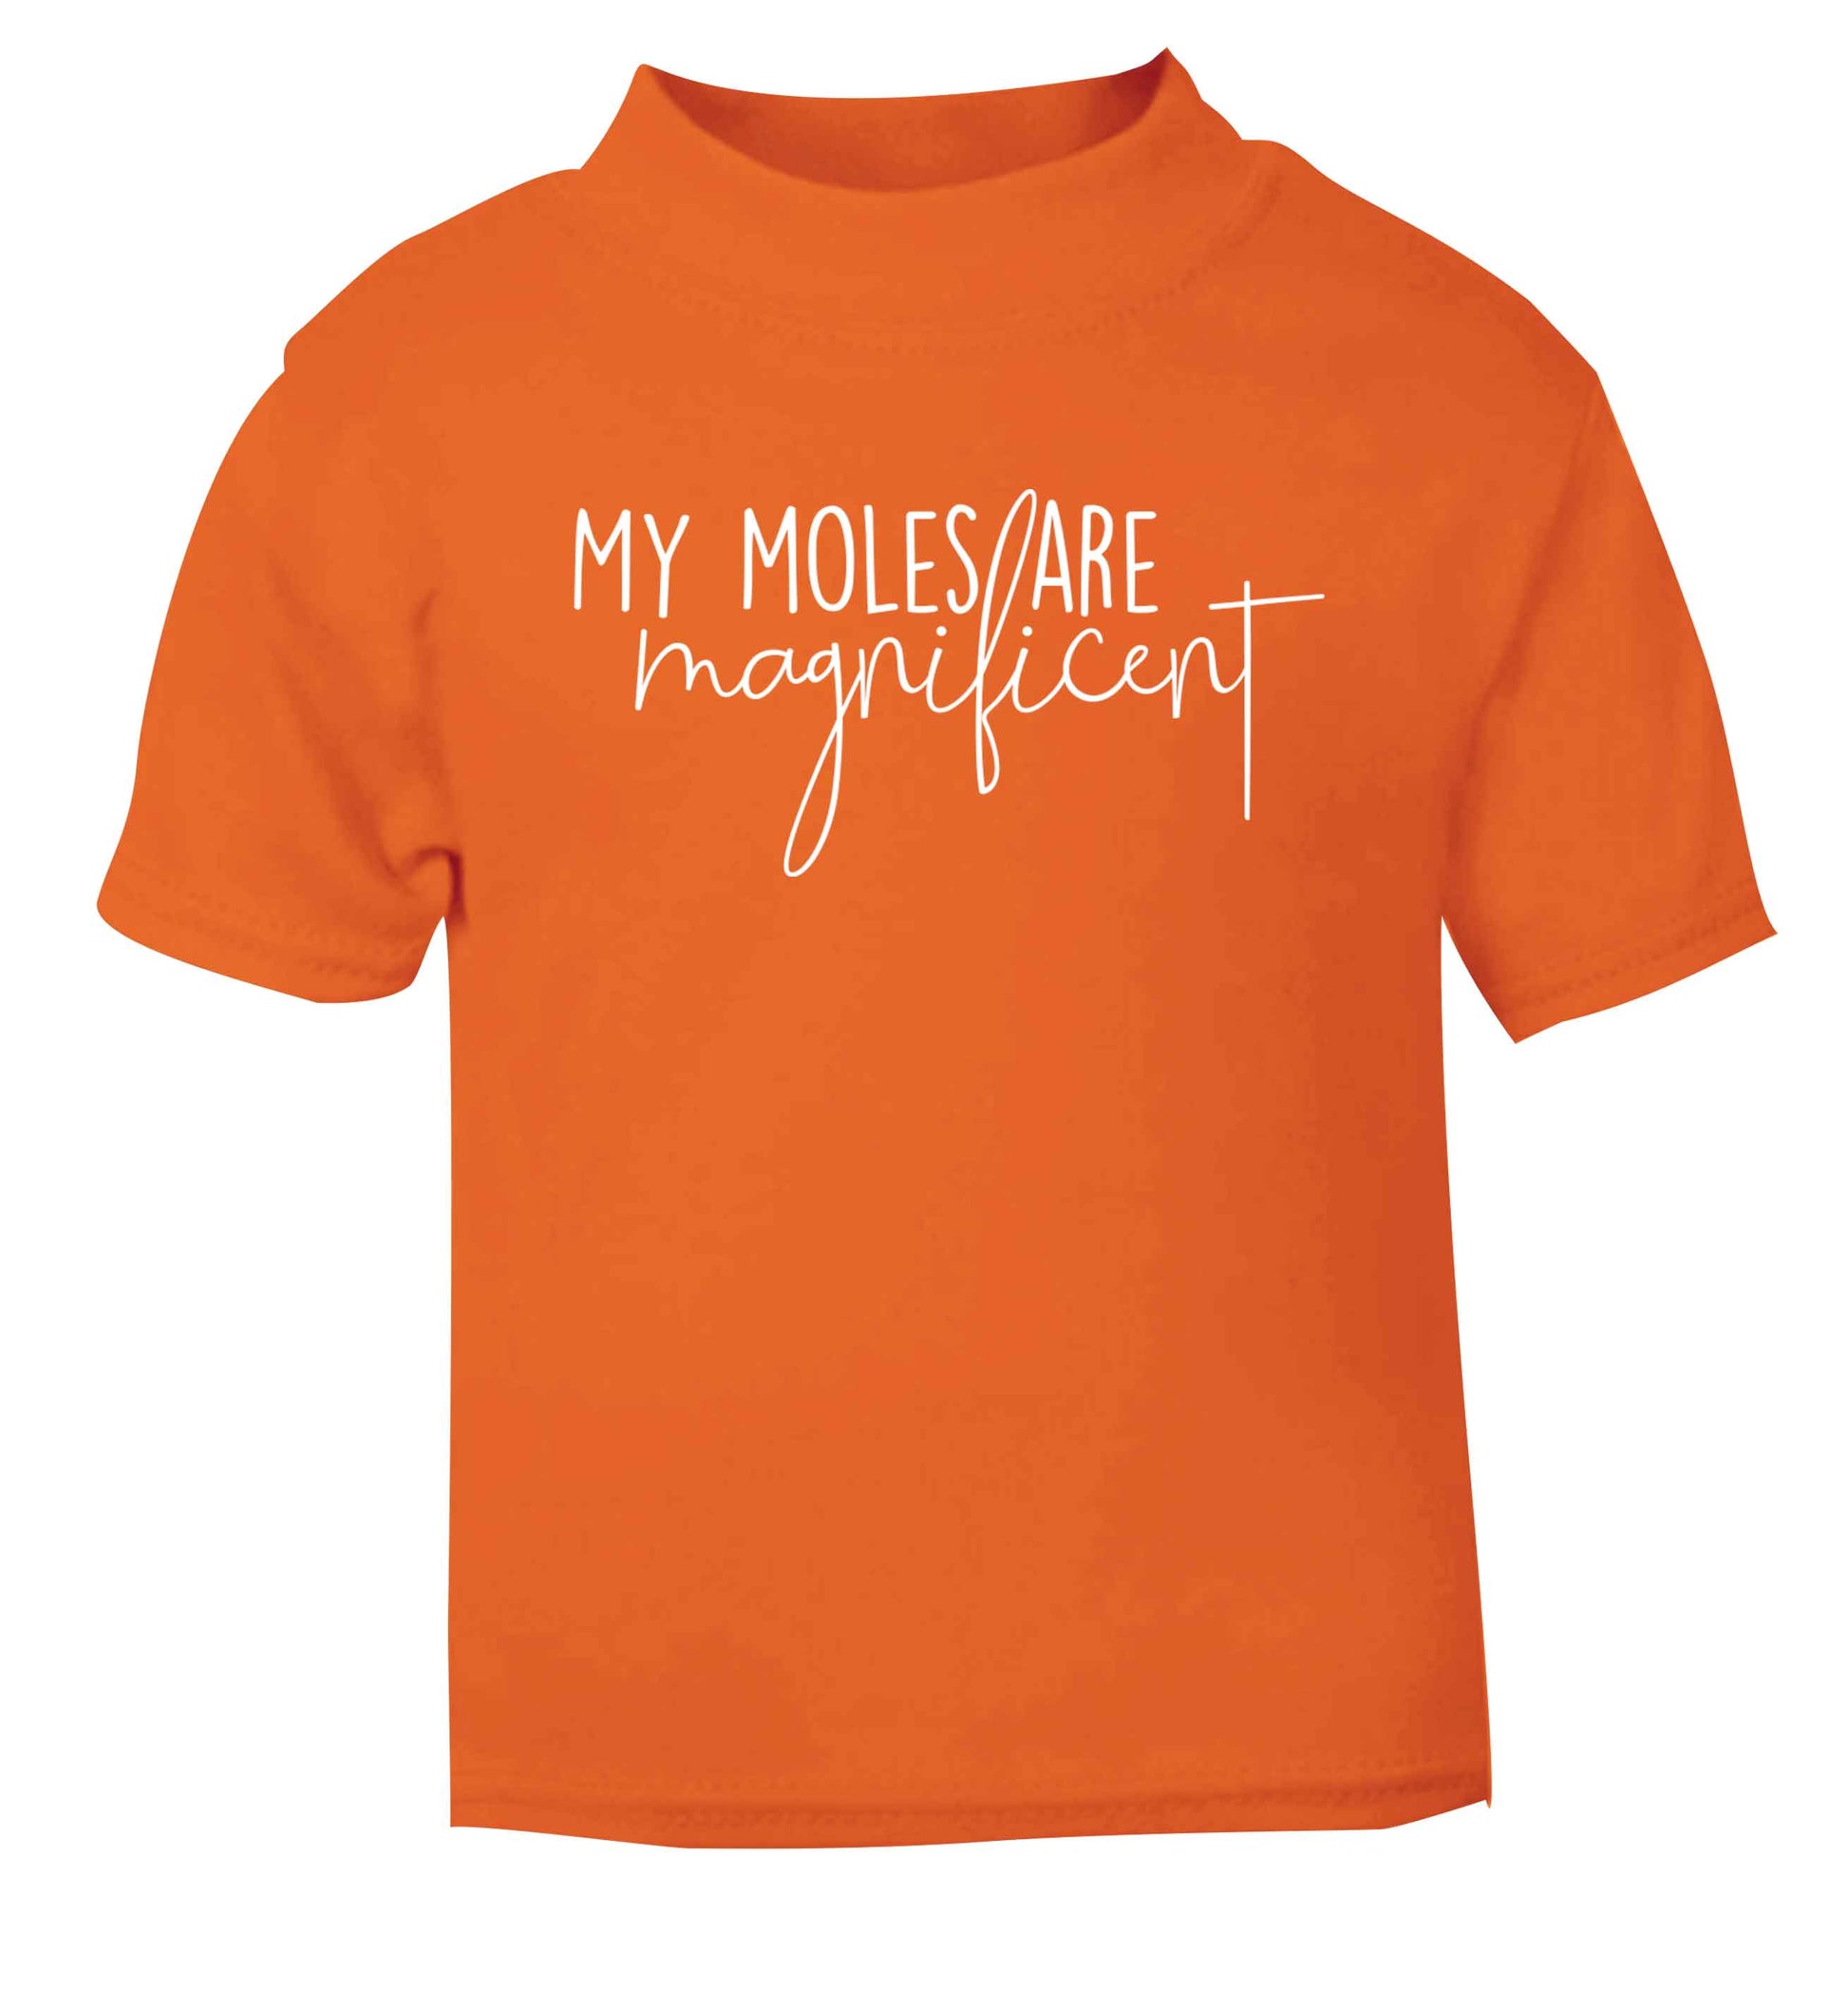 My moles are magnificent orange baby toddler Tshirt 2 Years